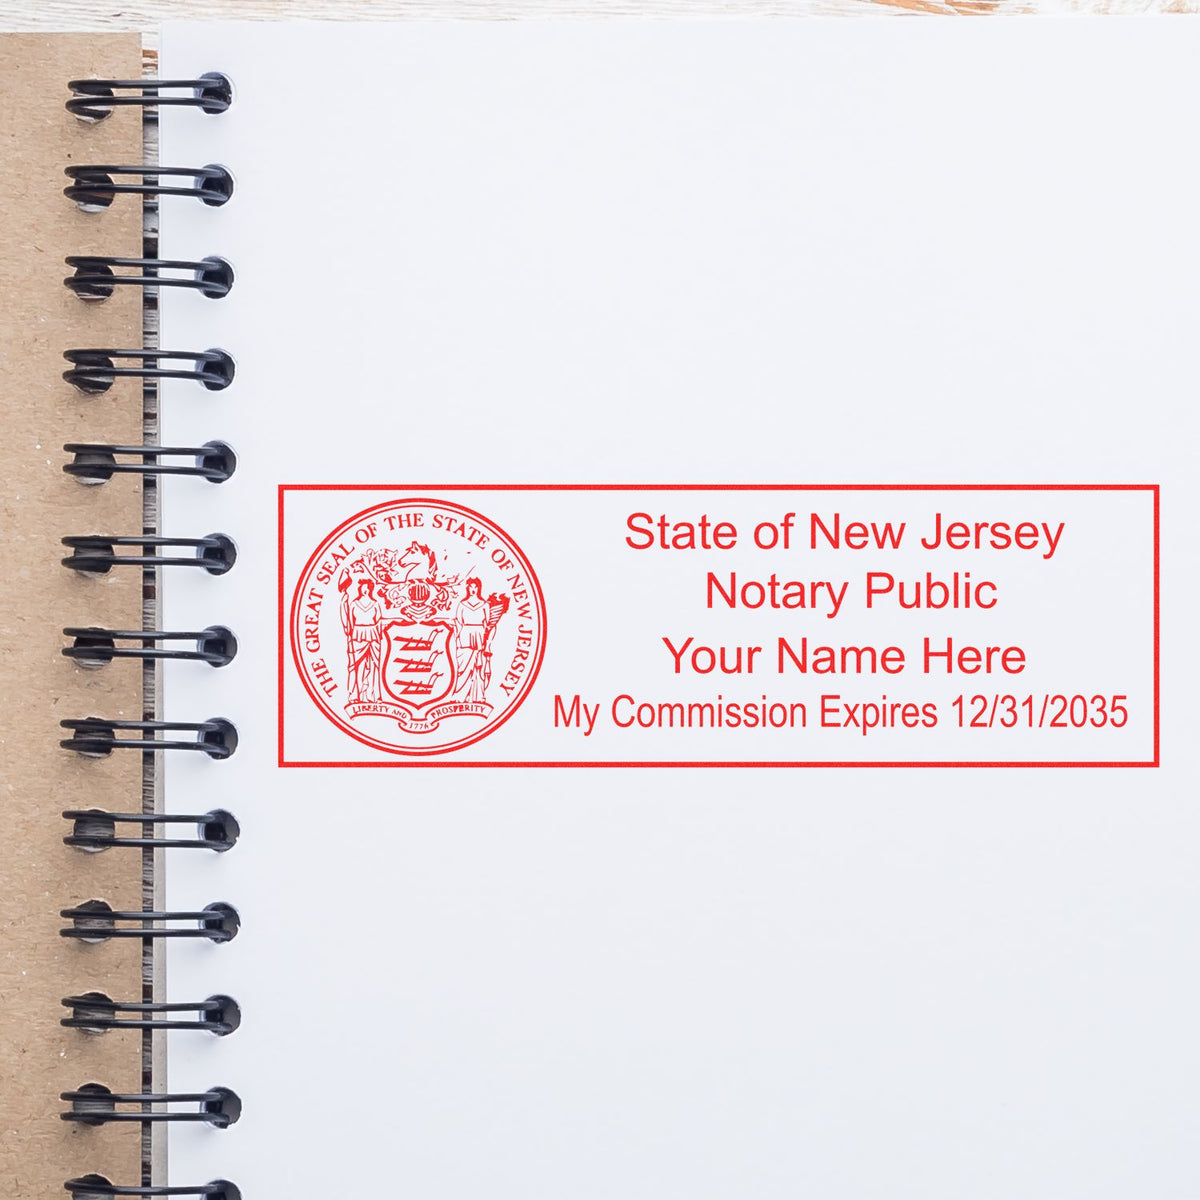 An alternative view of the Slim Pre-Inked State Seal Notary Stamp for New Jersey stamped on a sheet of paper showing the image in use